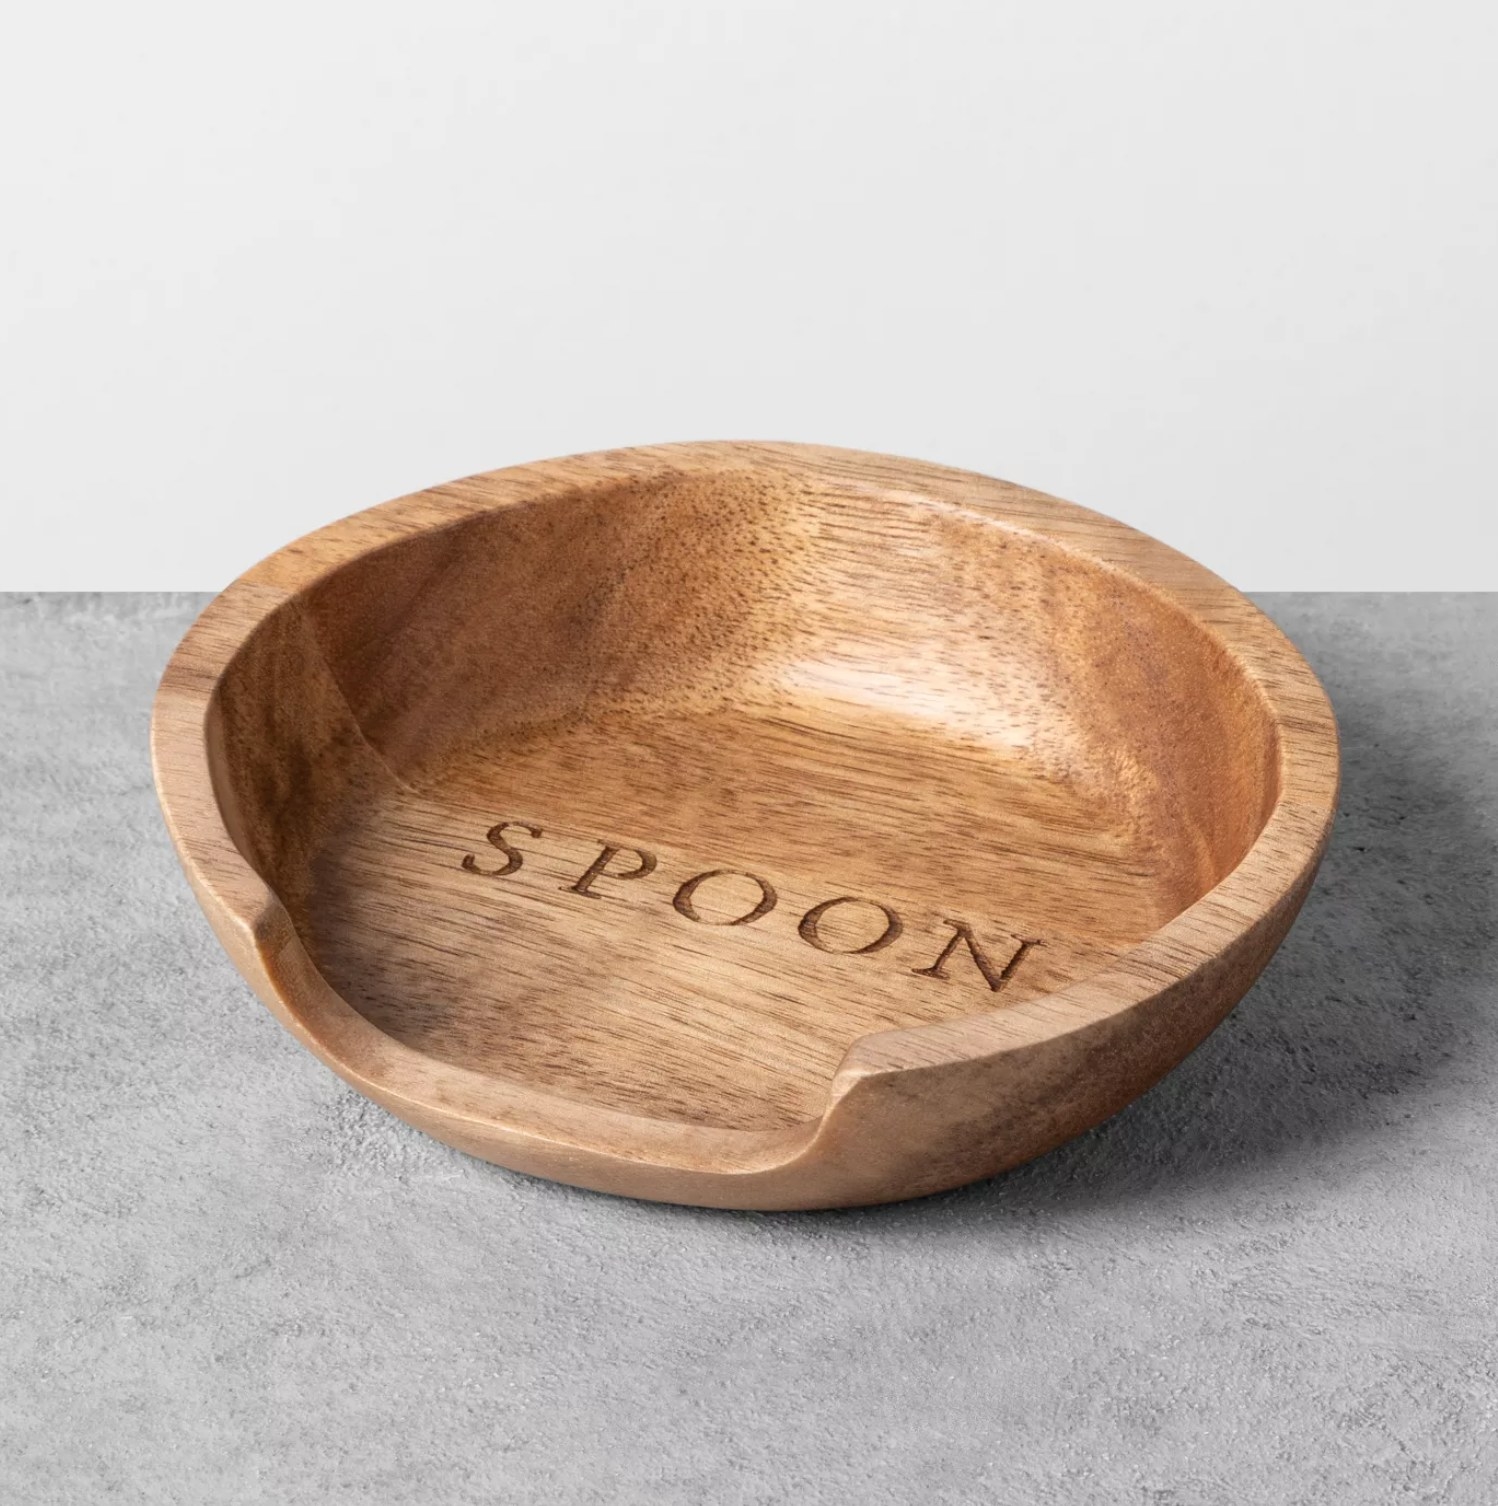 The wooden rest with the word spoon in the center